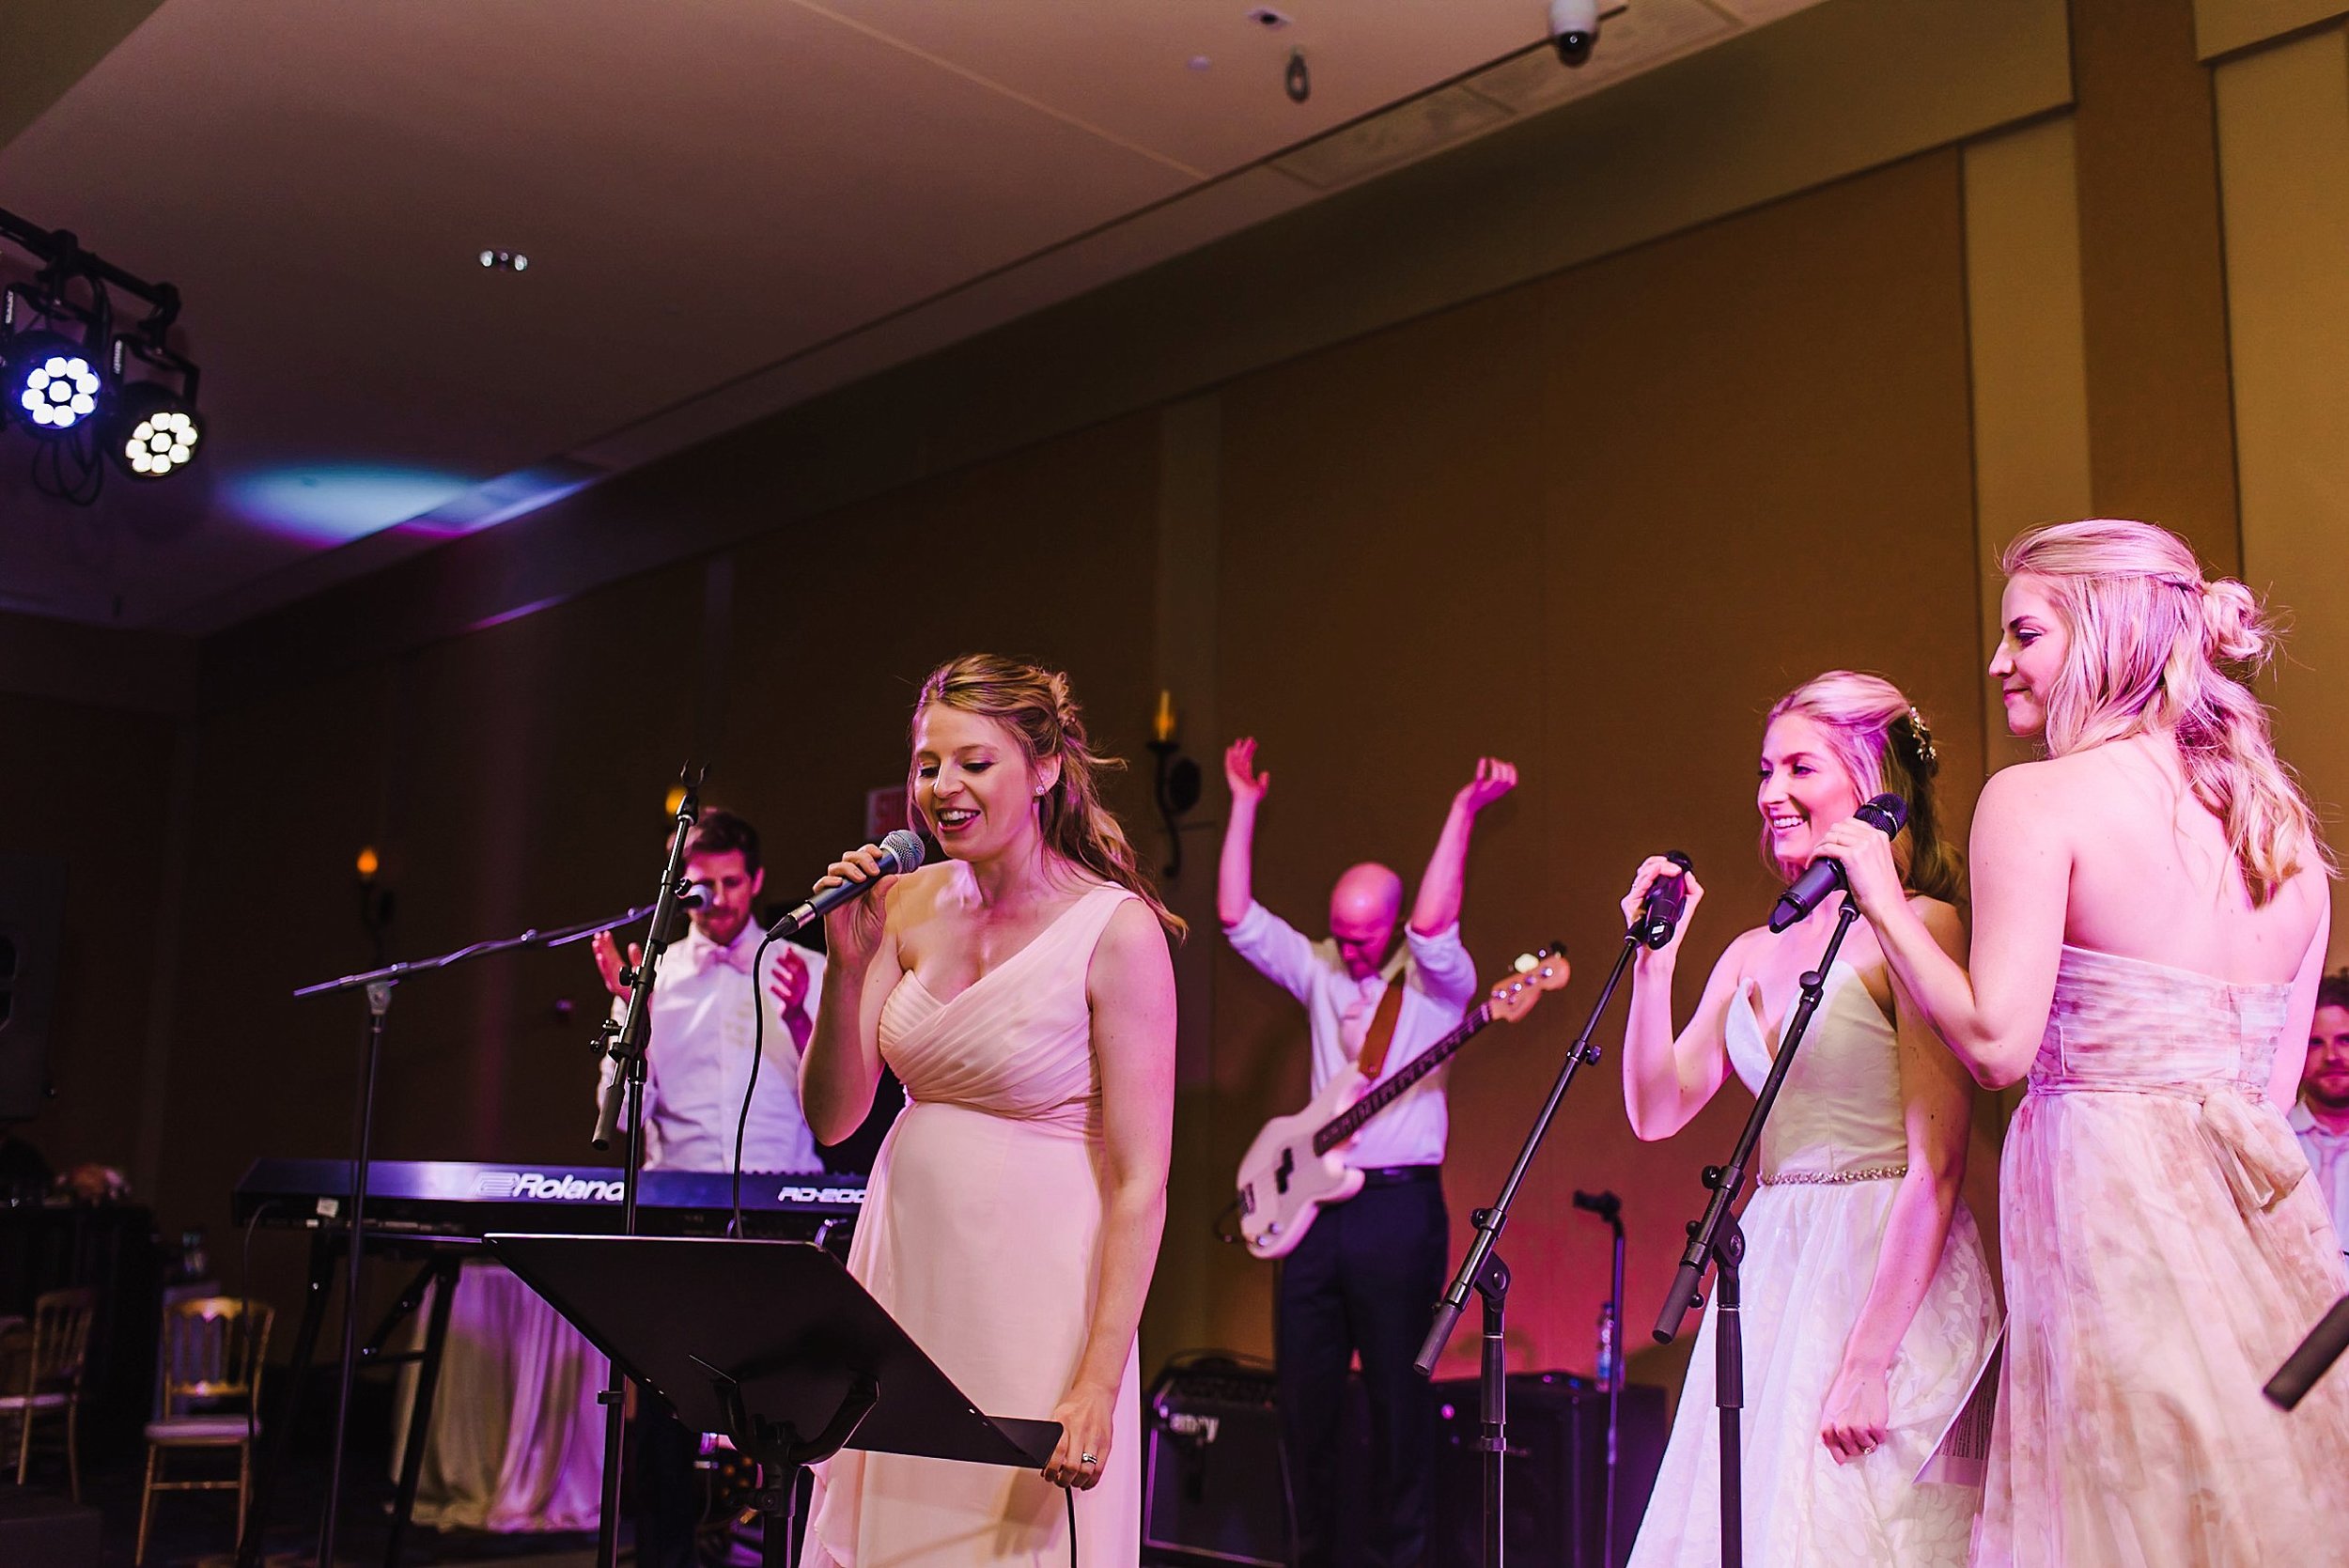  The bride got on stage with her sisters, who are equally as talented! 